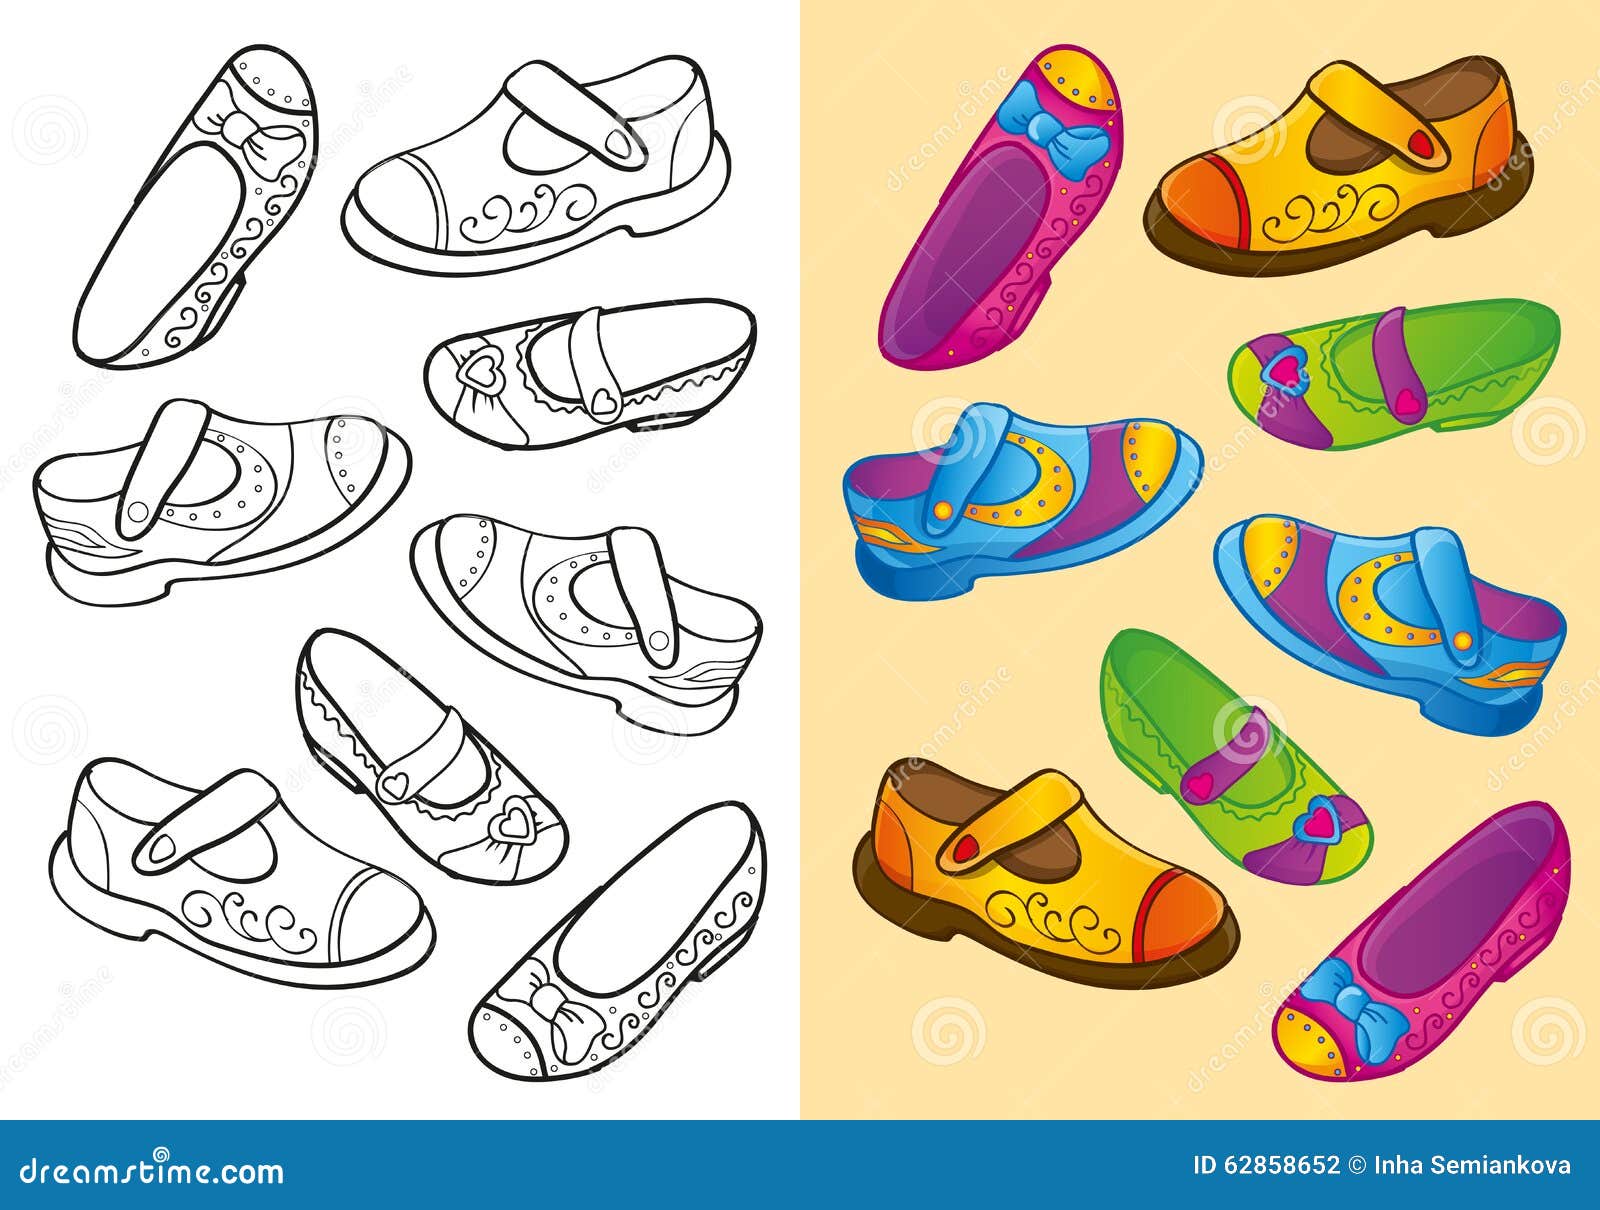 Coloring Book Of Set Dfferent Shoes Stock Illustration - Image: 62858652